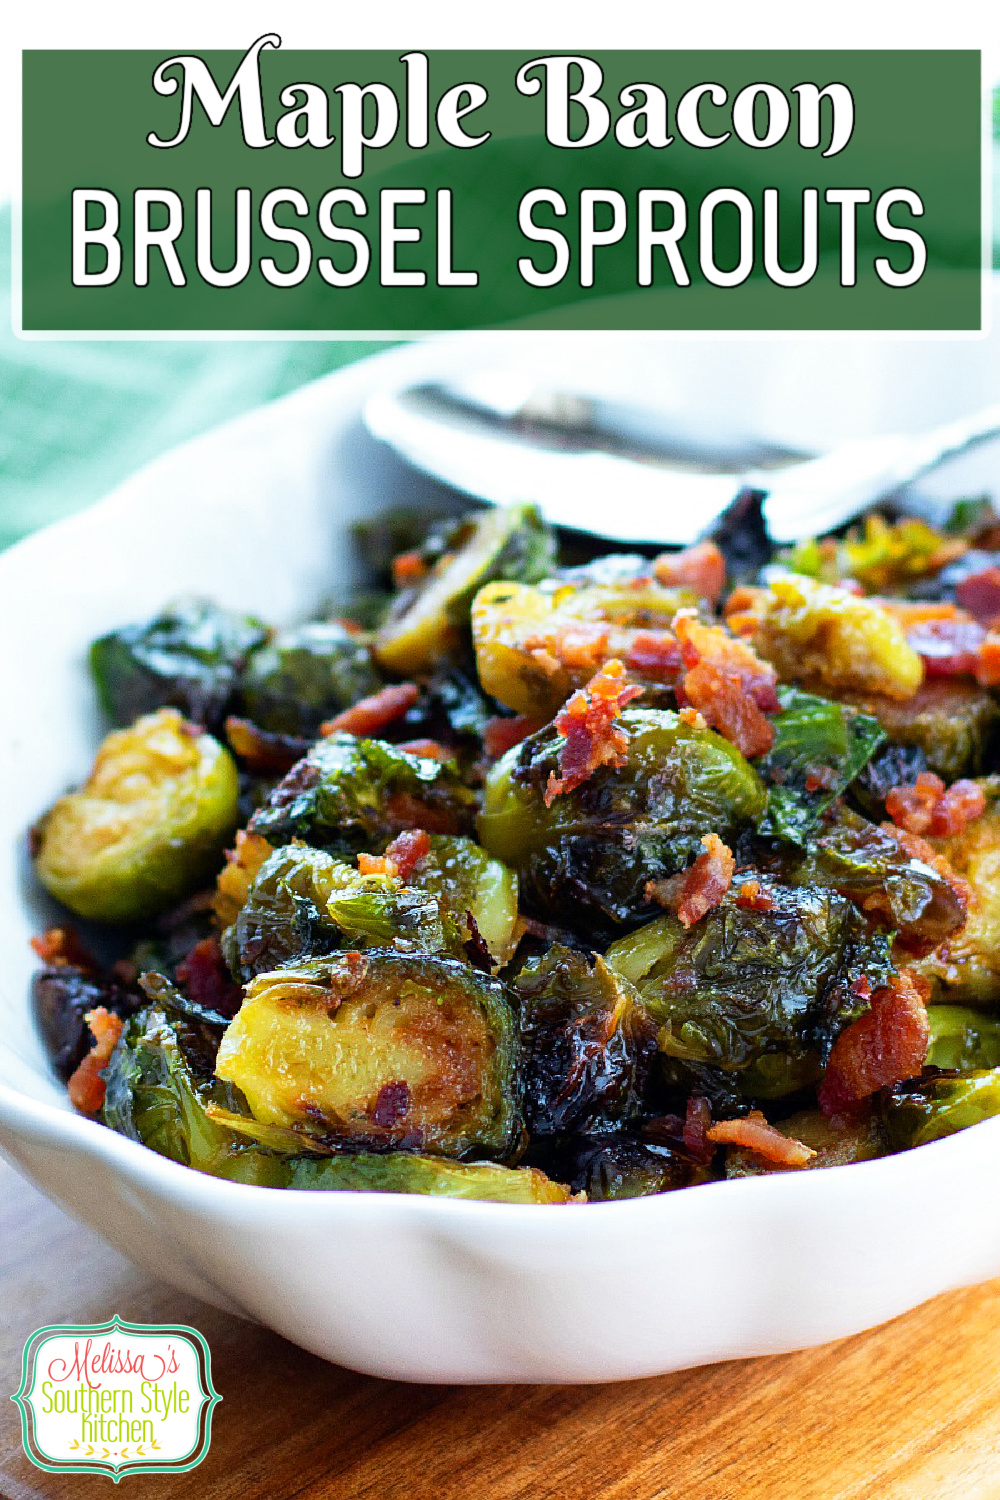 These Maple Bacon Brussel Sprouts are oven roasted until sweet and caramelized #brusselssprouts #brusselsprouts #roastedvegetables #maplebacon #bacon #maplesyrup #easyrecipes #thanksgiving #christmas #holidaysidedishes #holidayrecipes via @melissasssk